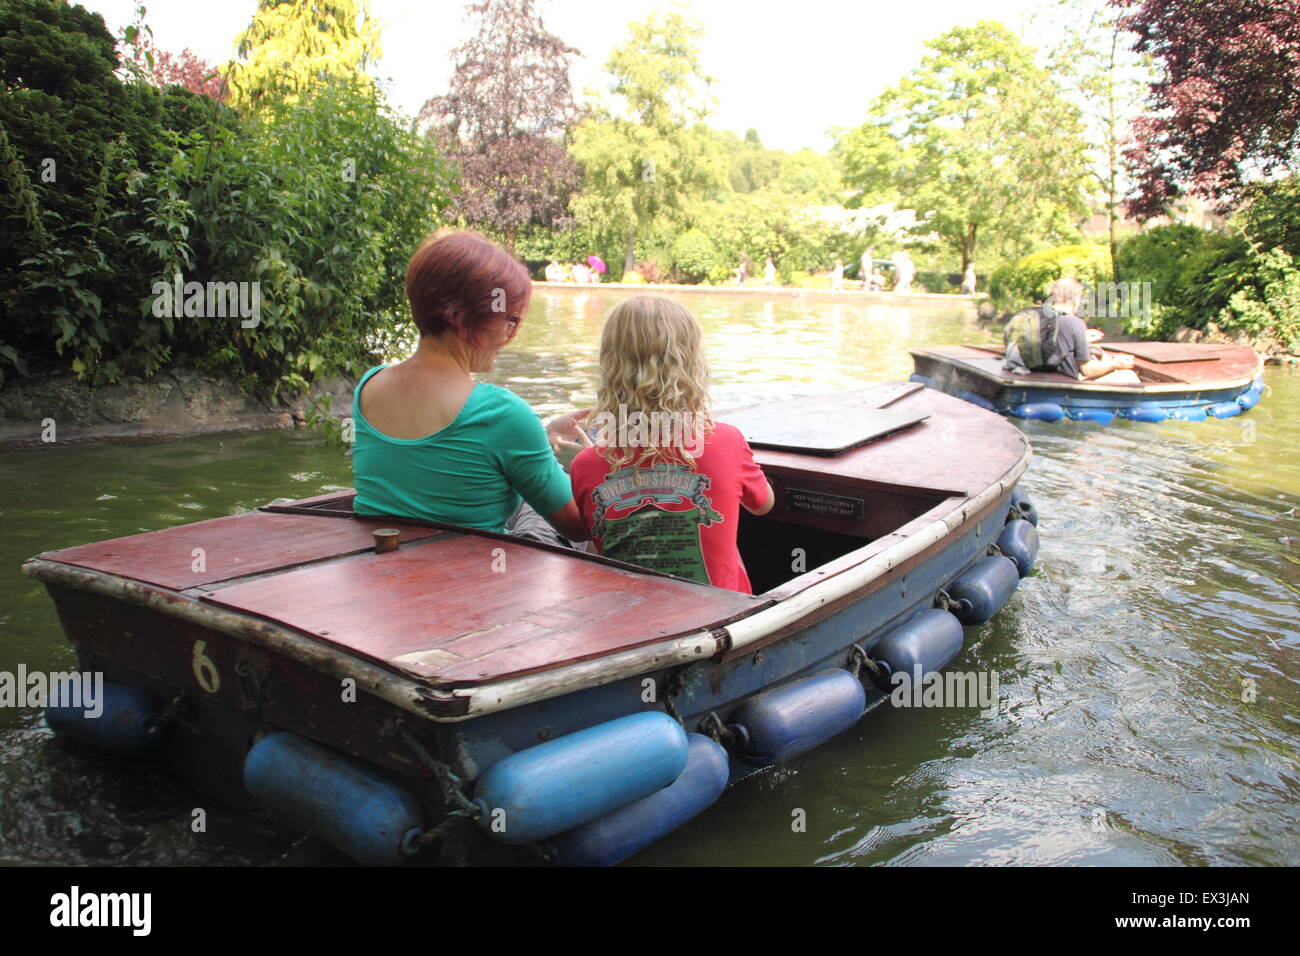 A woman and girl on the boating lake at Hall Leys Park in Matlock, Derbyshire on a warm summer day - July, England, UK Stock Photo